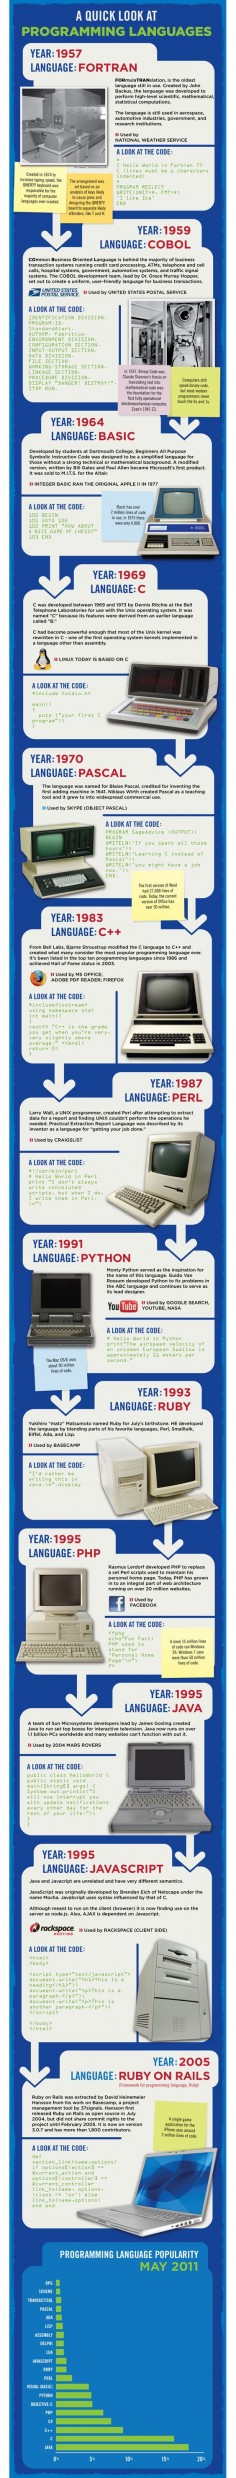 INFOGRAPHIC - An historical look at computer programming languages - From #Programmer #Jobs